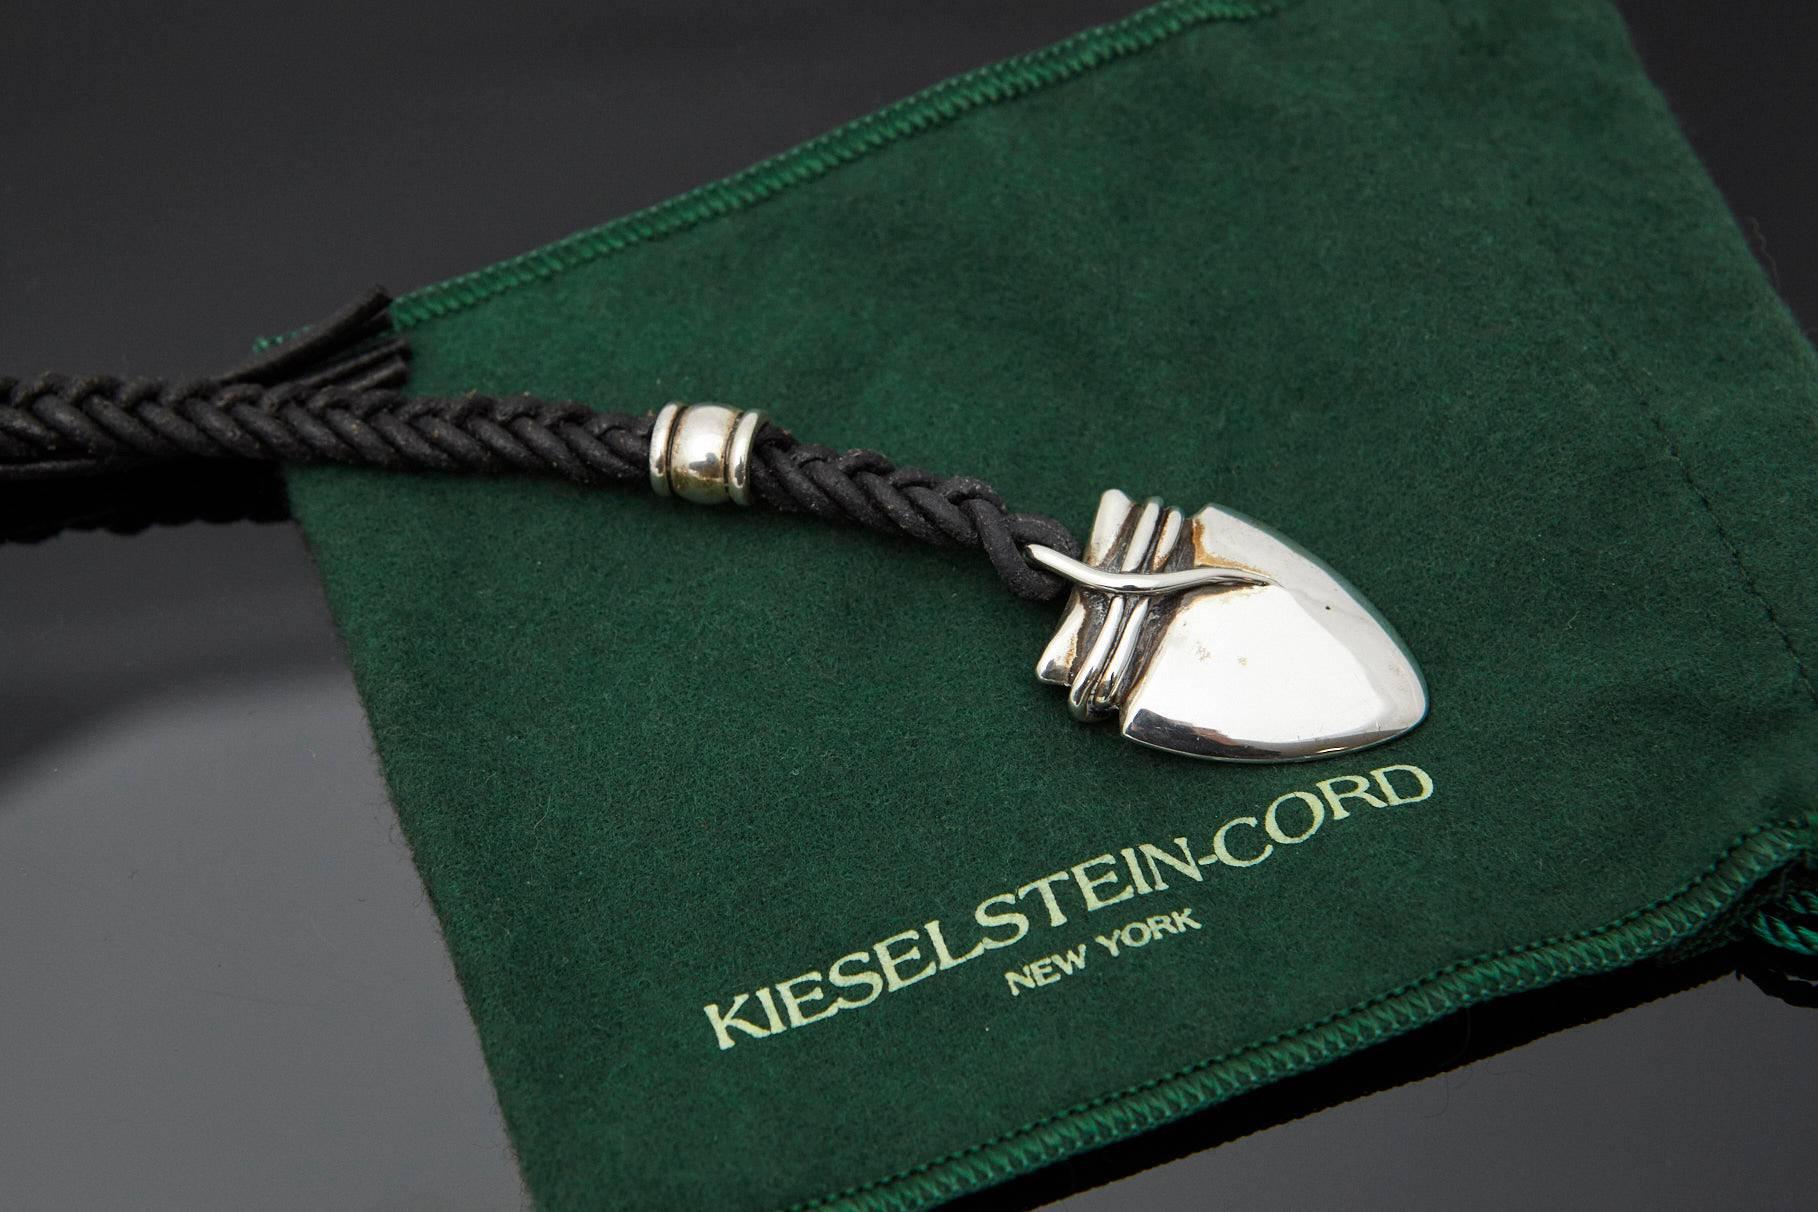 American Barry Kieselstein-Cord Braided Leather and Sterling Arrow Key Chain in Box, 1973